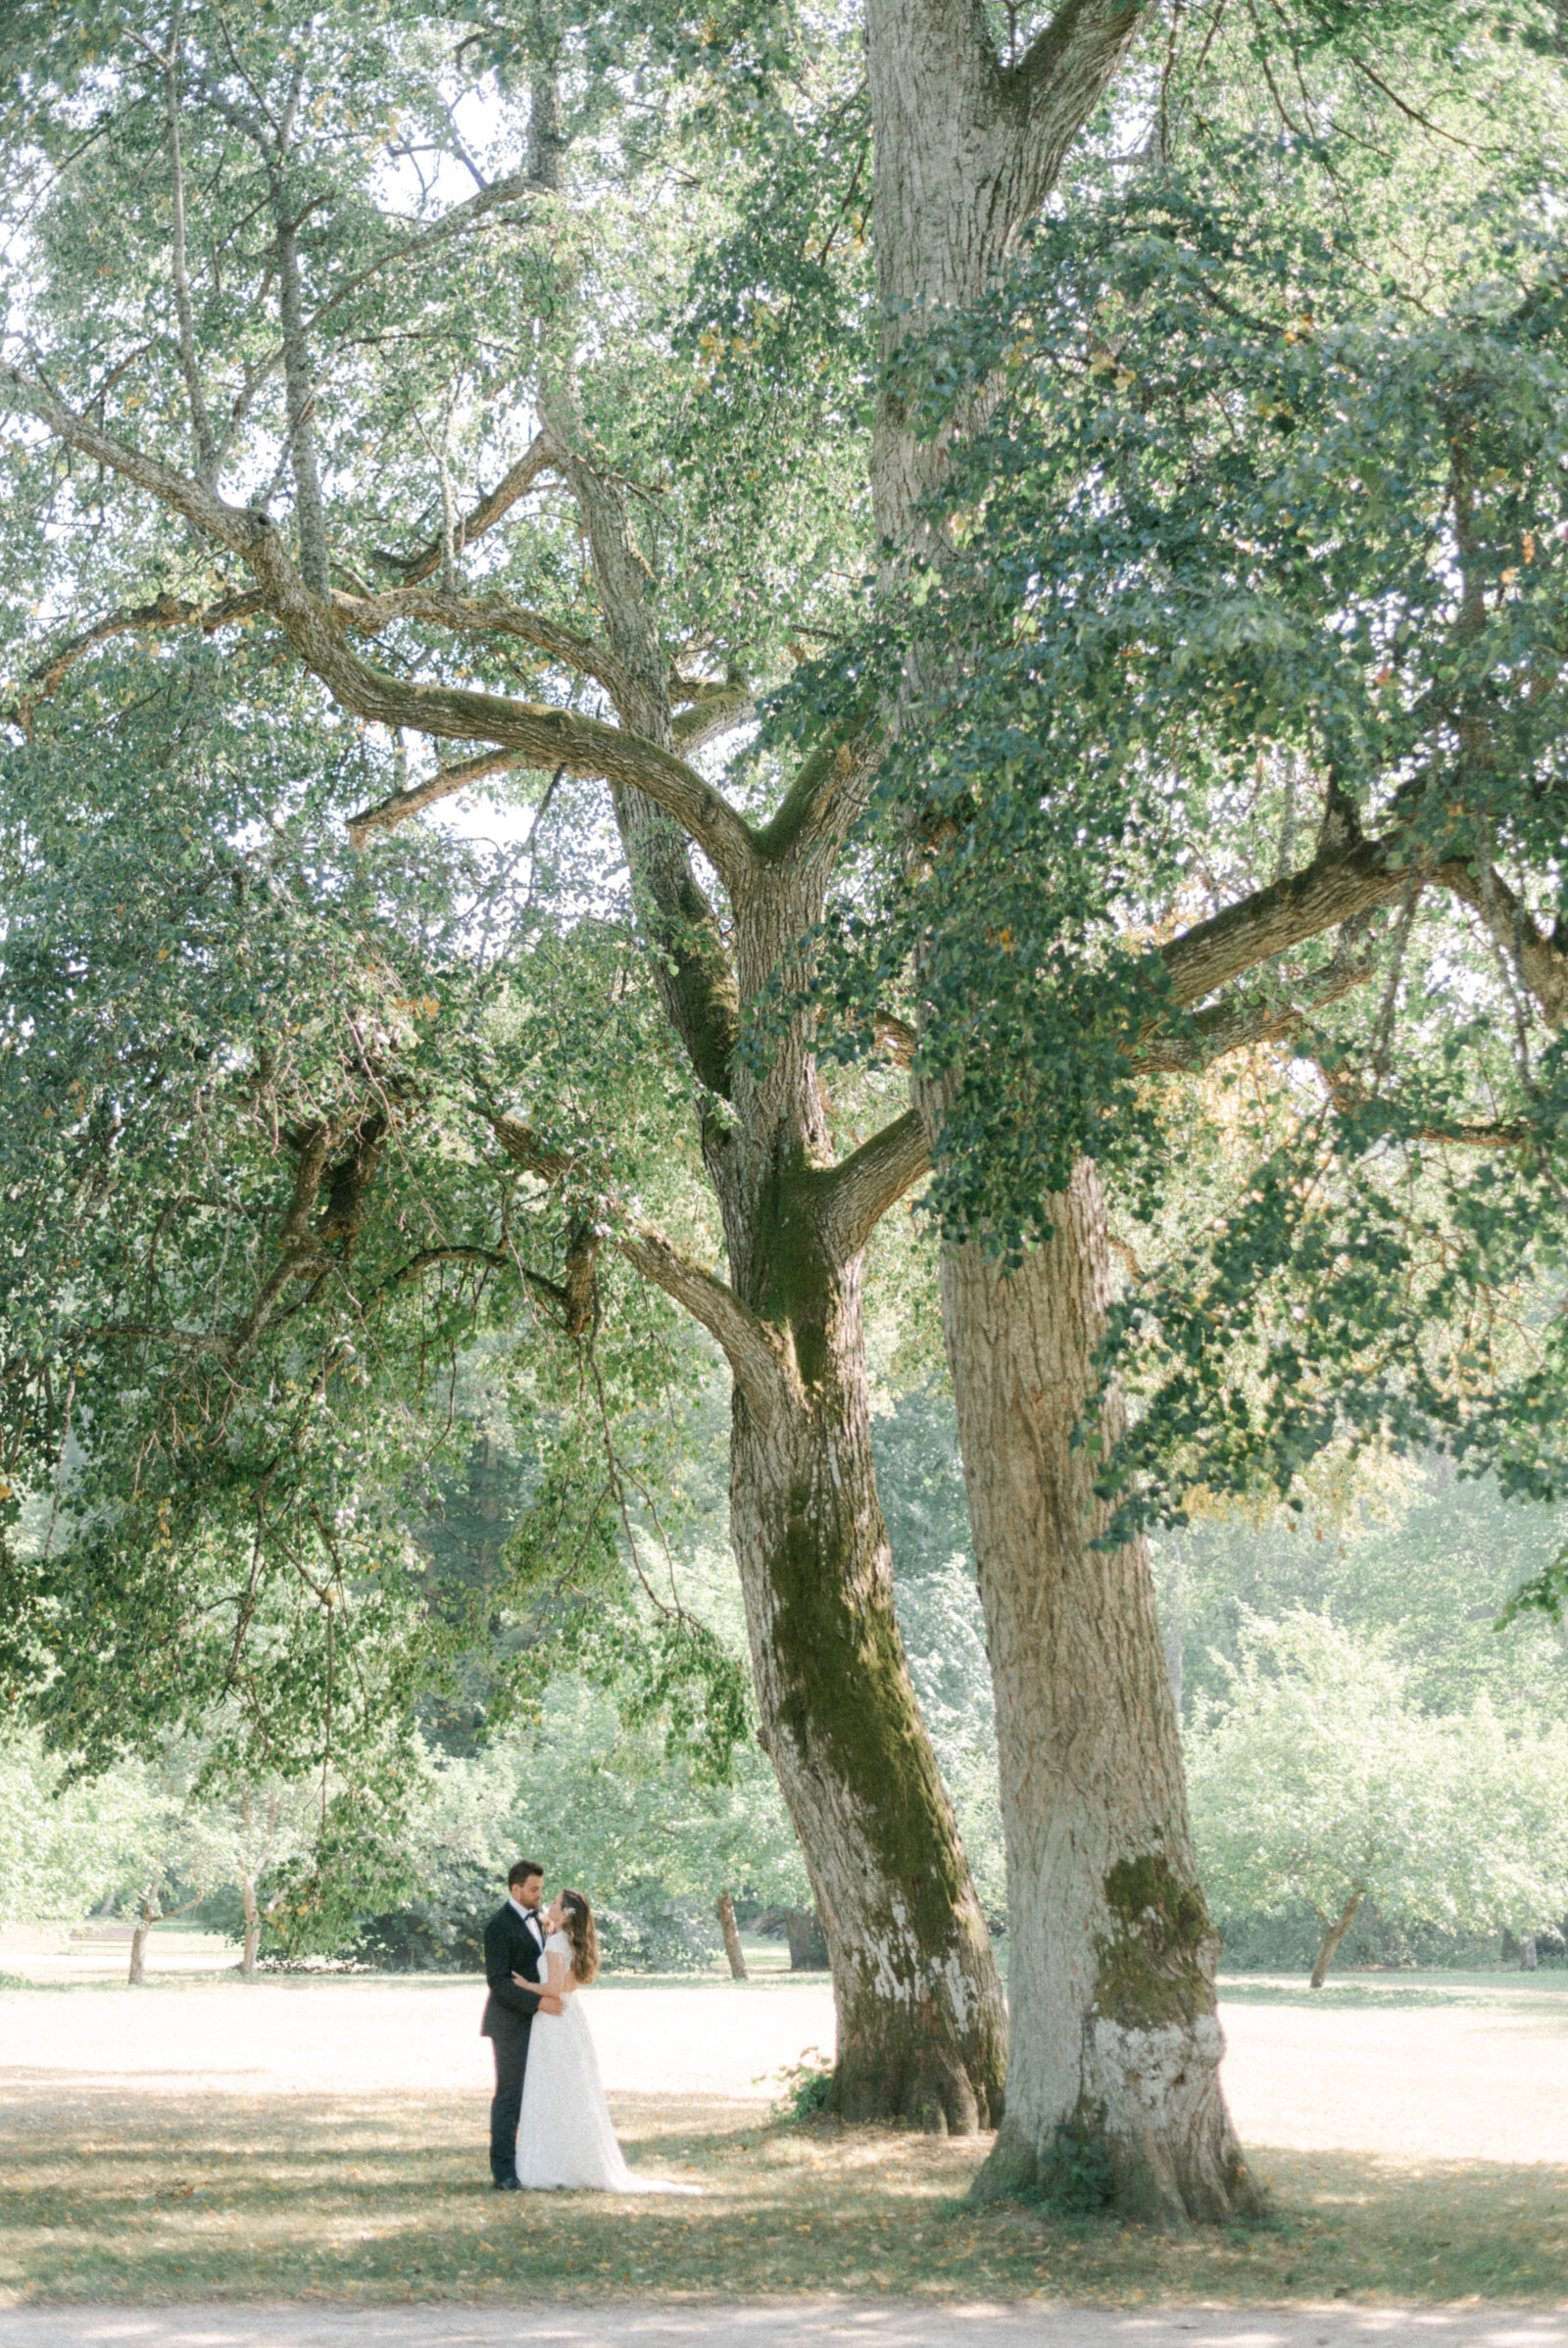 Wedding couple standing under a big oak in a park. Image photographed by wedding photographer Hannika Gabrielsson.